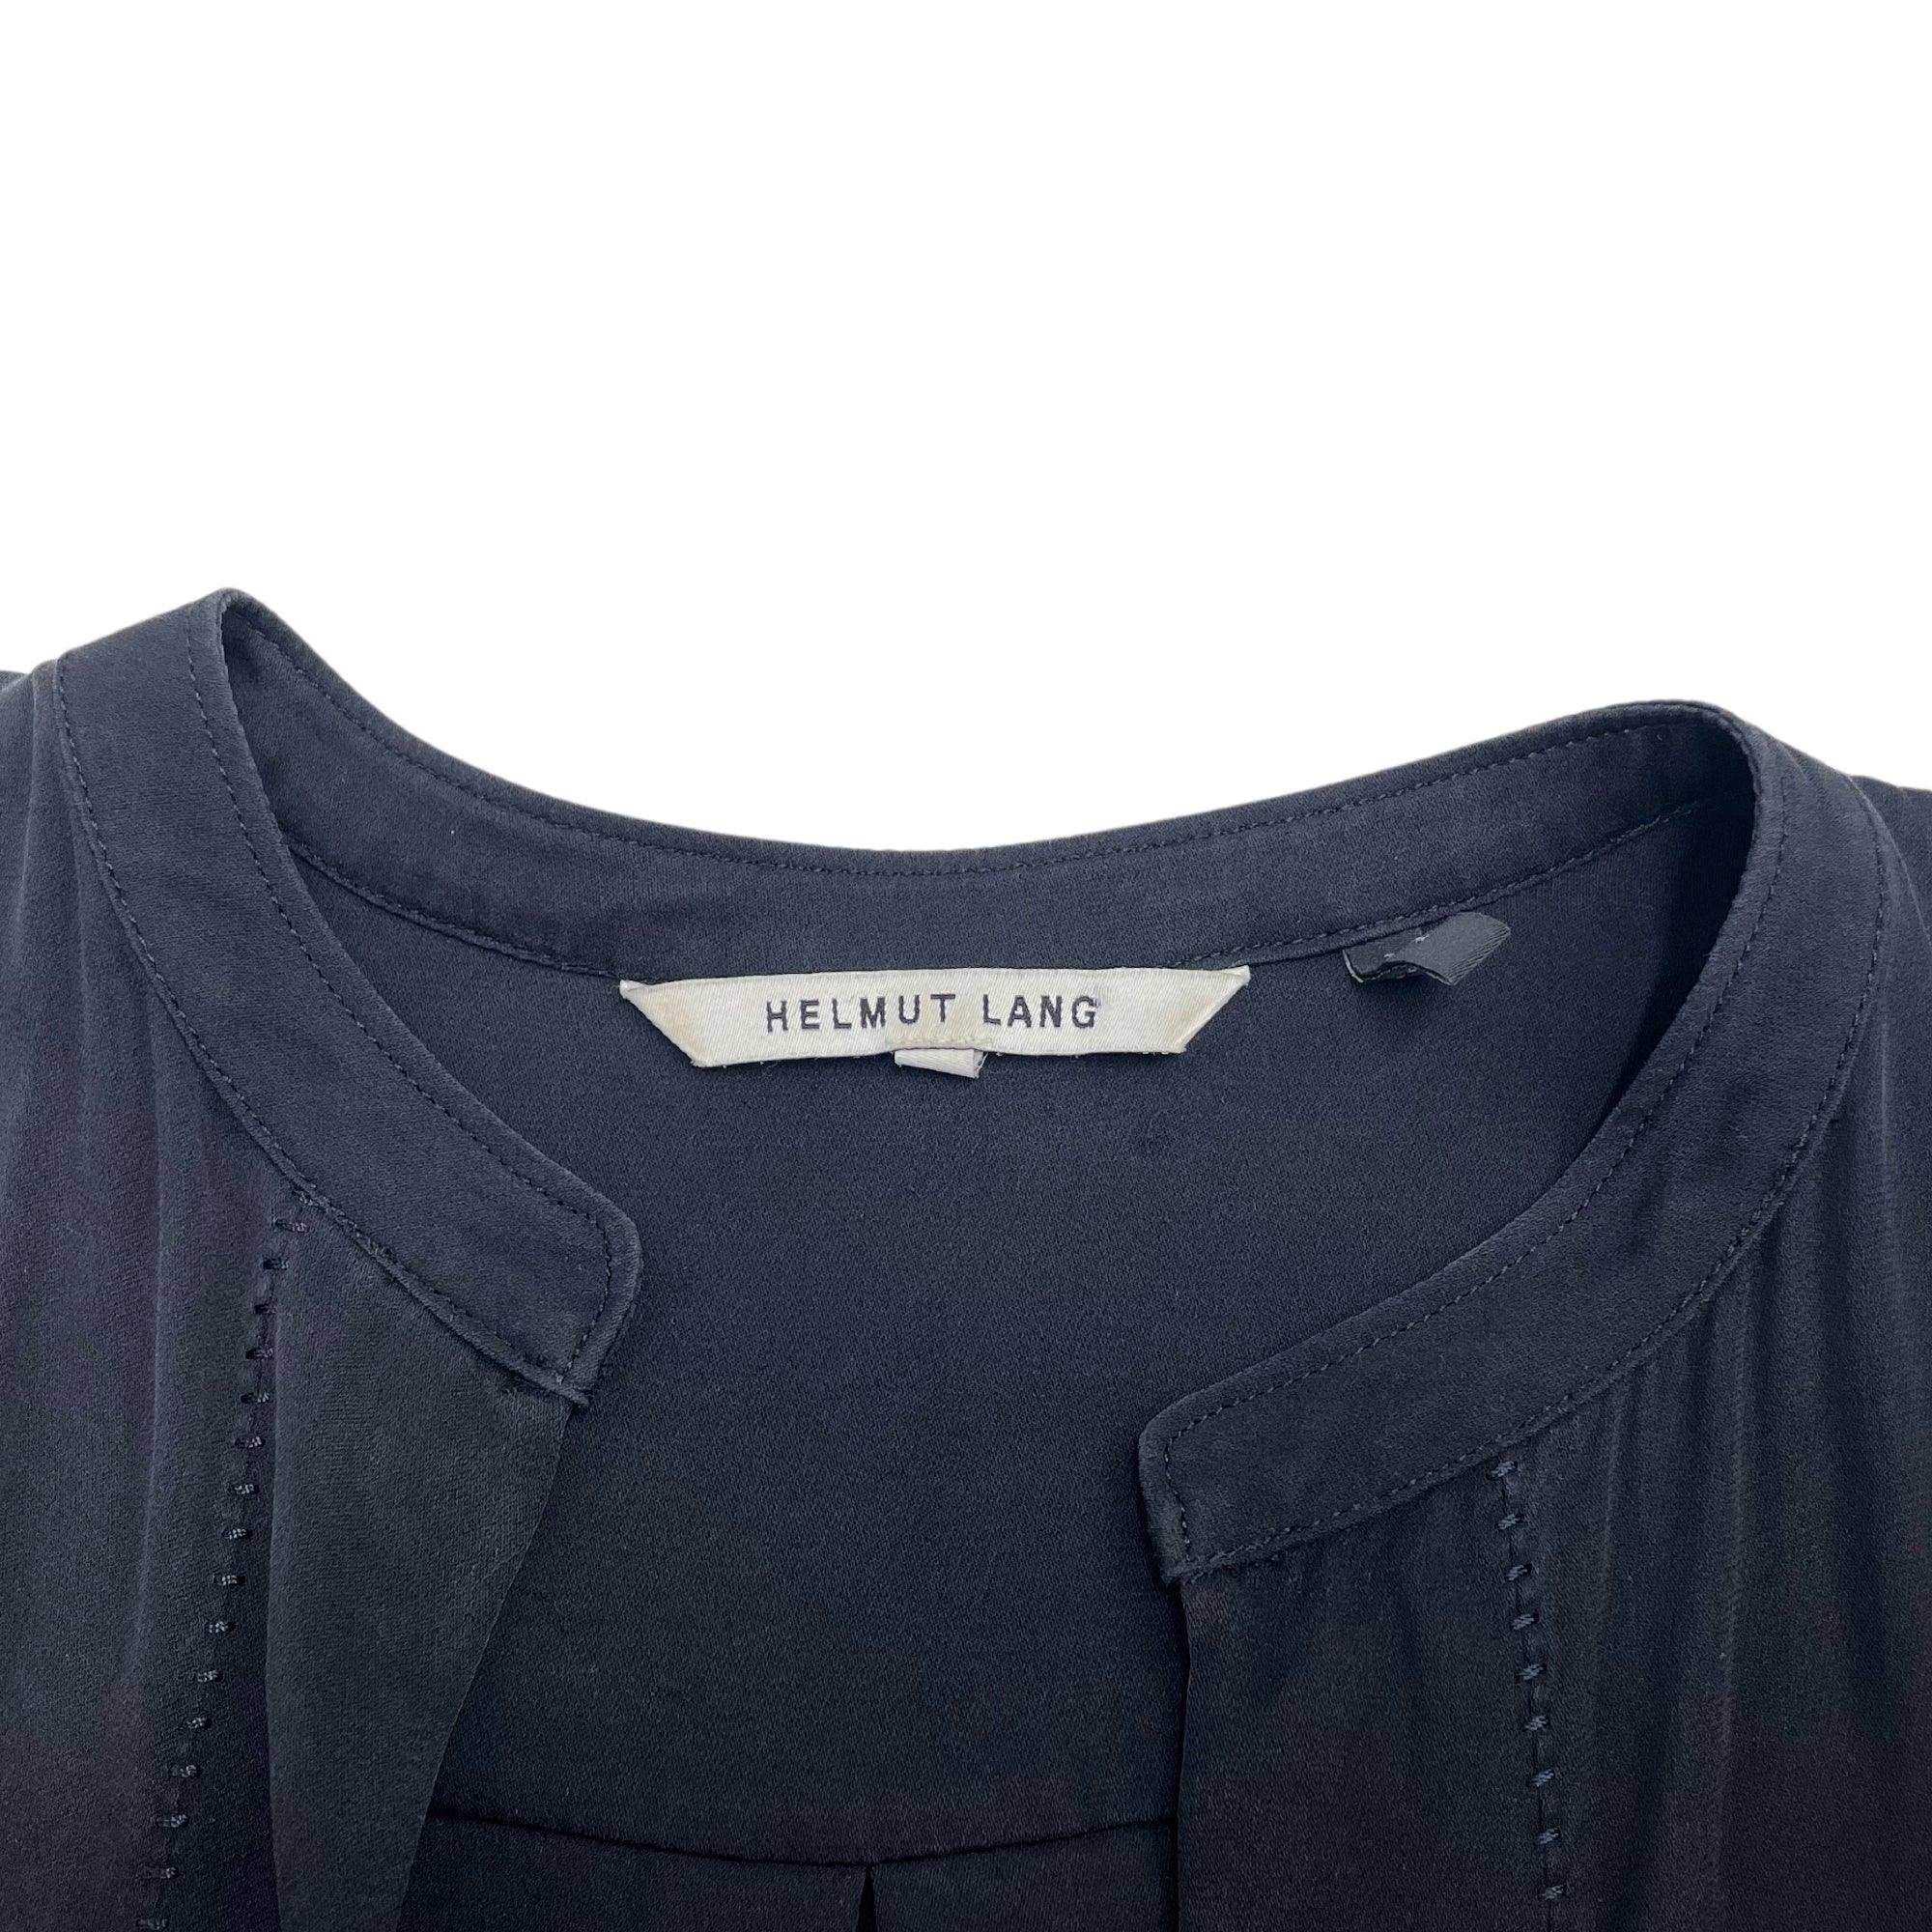 Helmut Lang Blouse - Women's S - Fashionably Yours